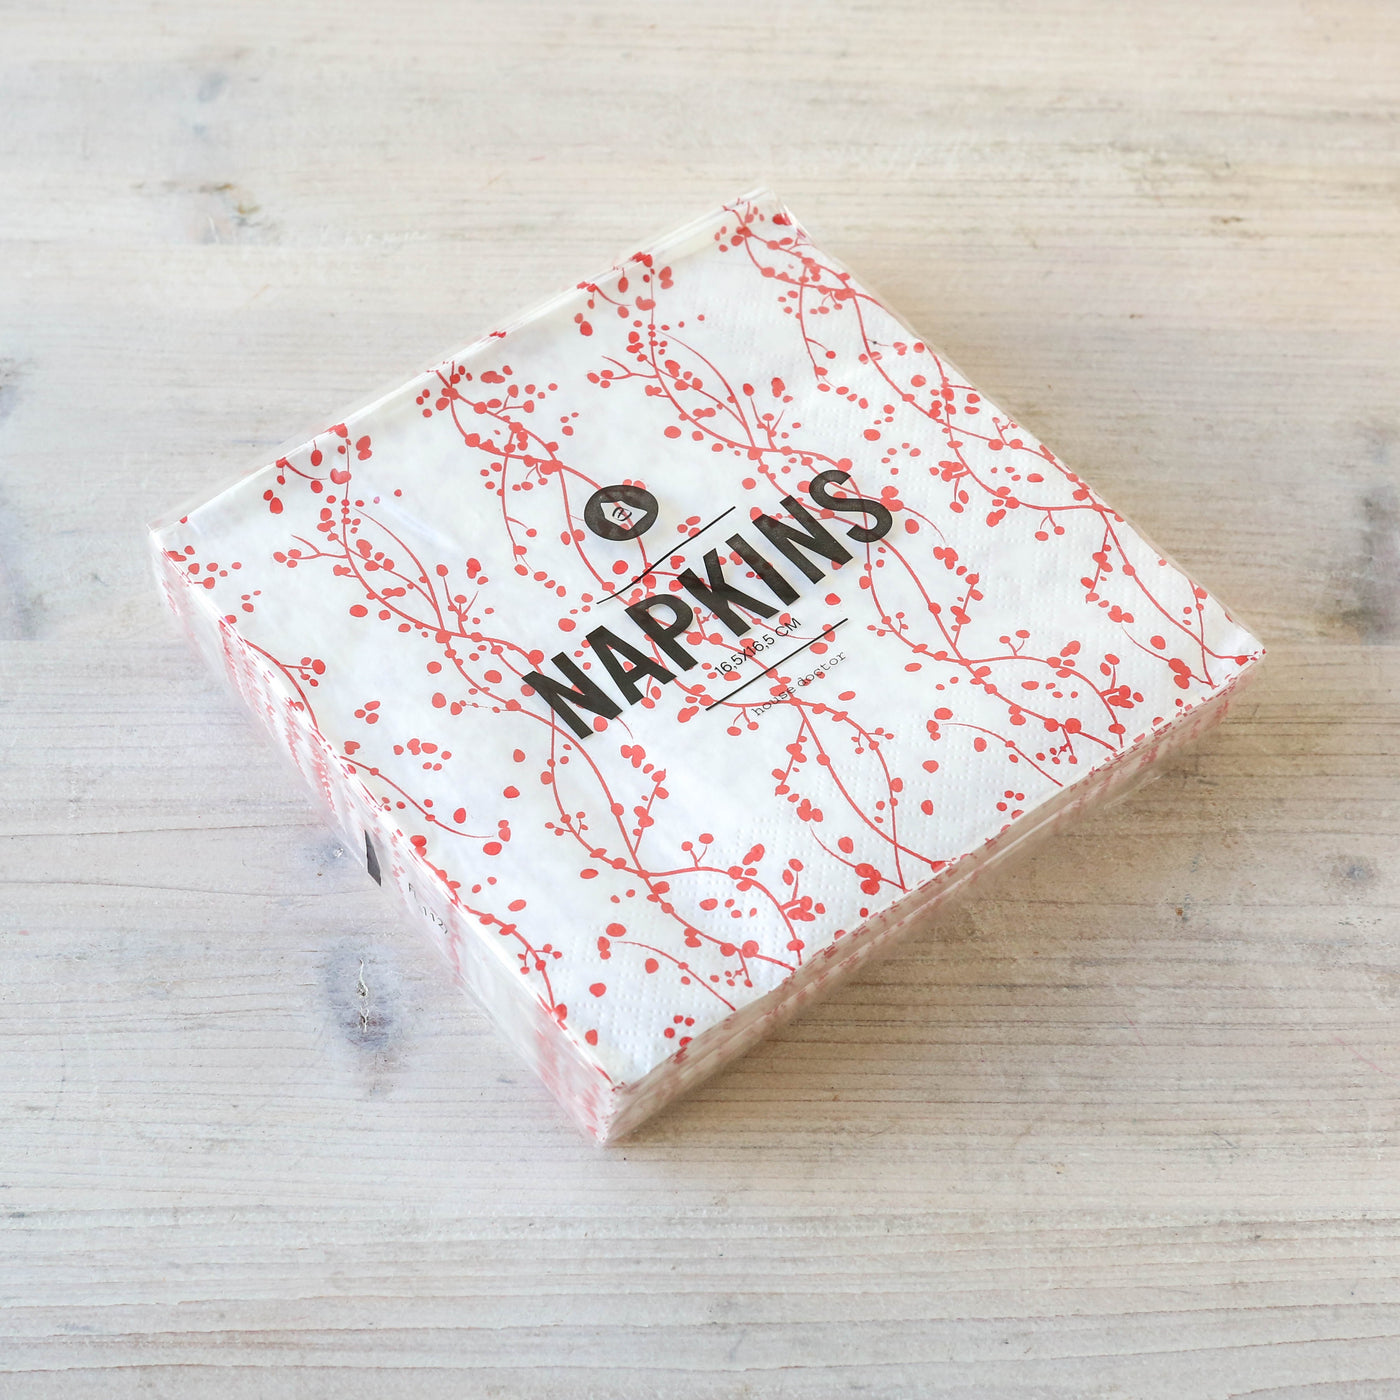 Pack of Paper Napkins - Red Berries